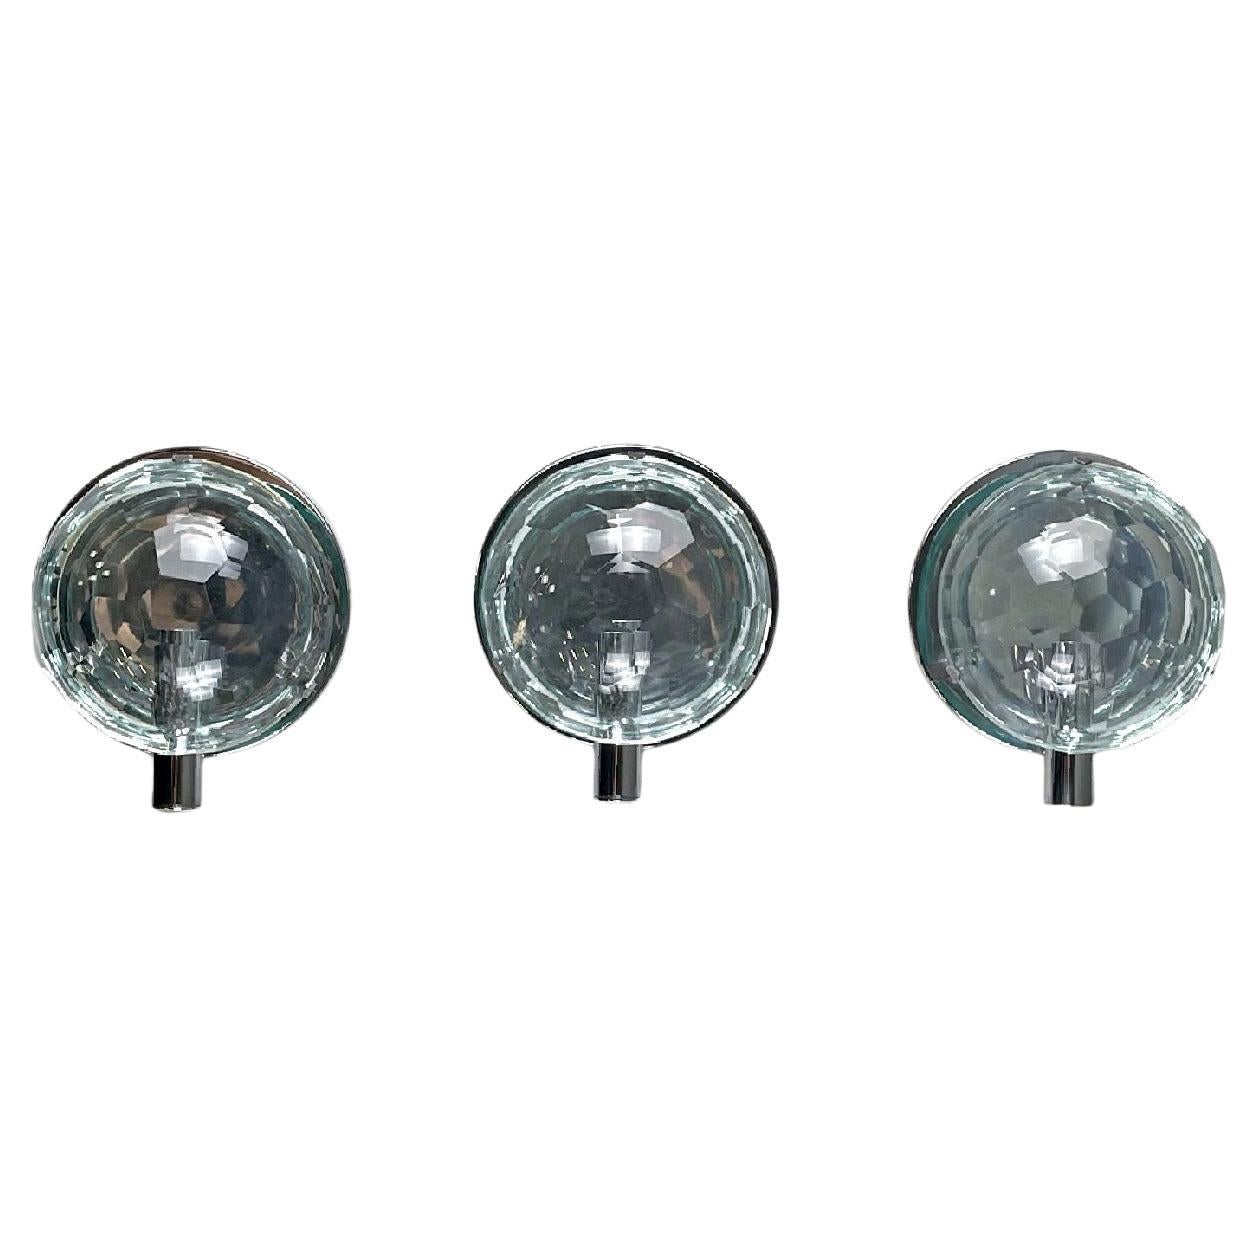 Italian mid-century modern chromed metal and faceted glass wall lights, 1960s For Sale